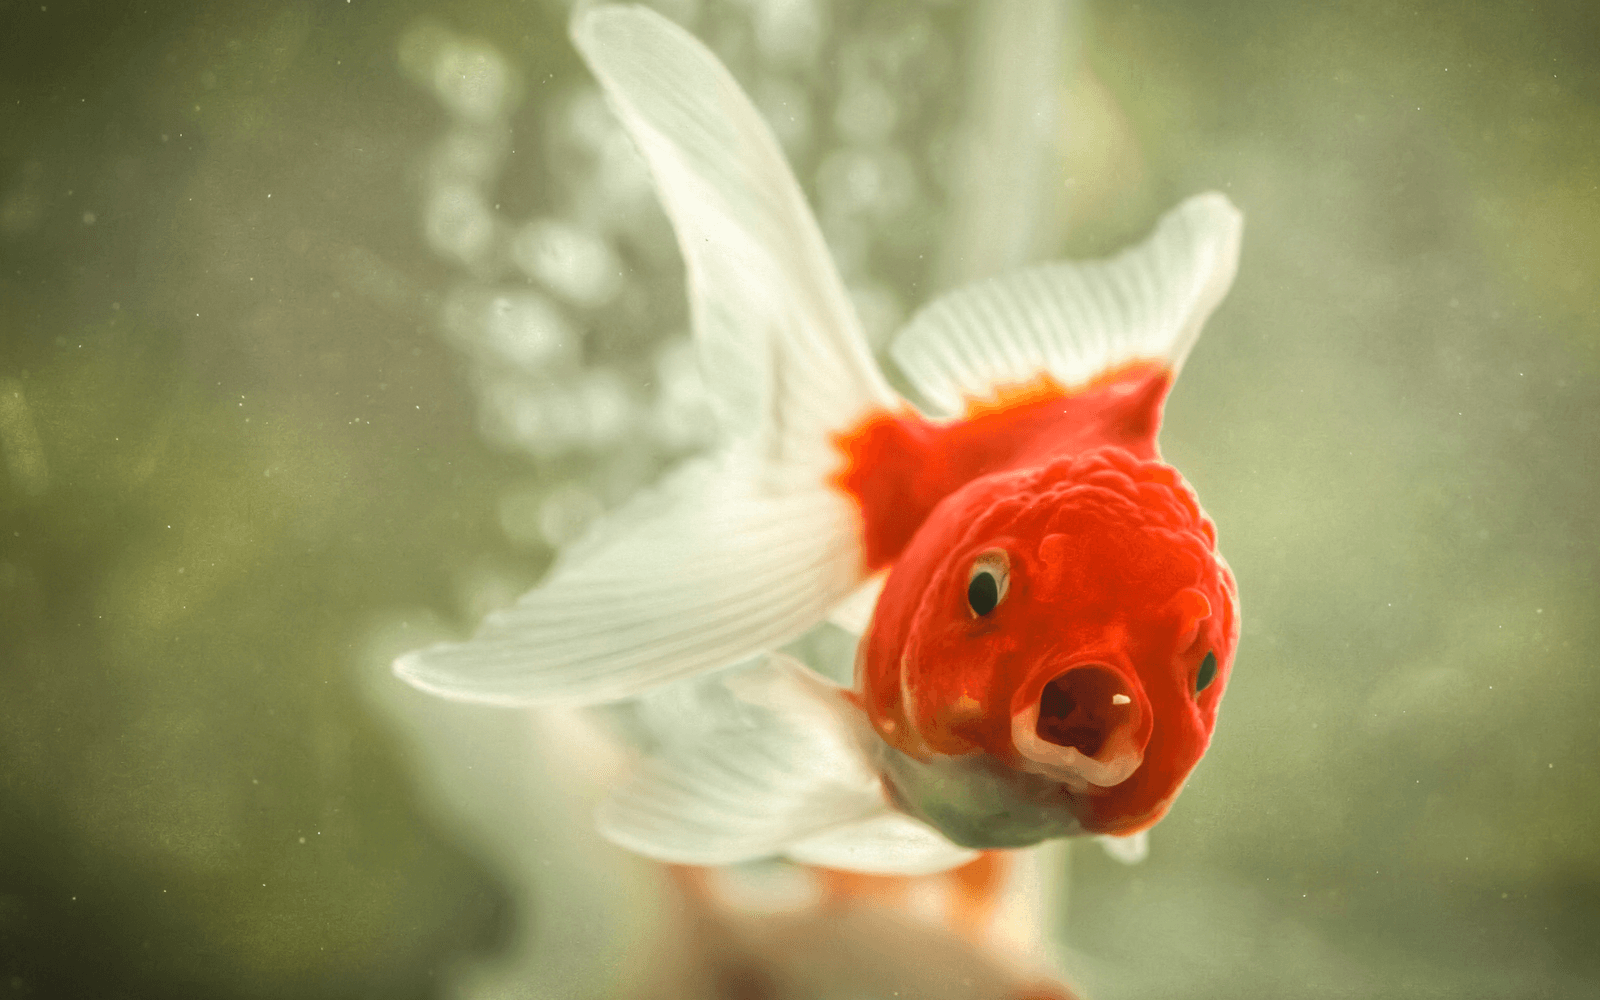 A close up of a goldfish with an open mouth